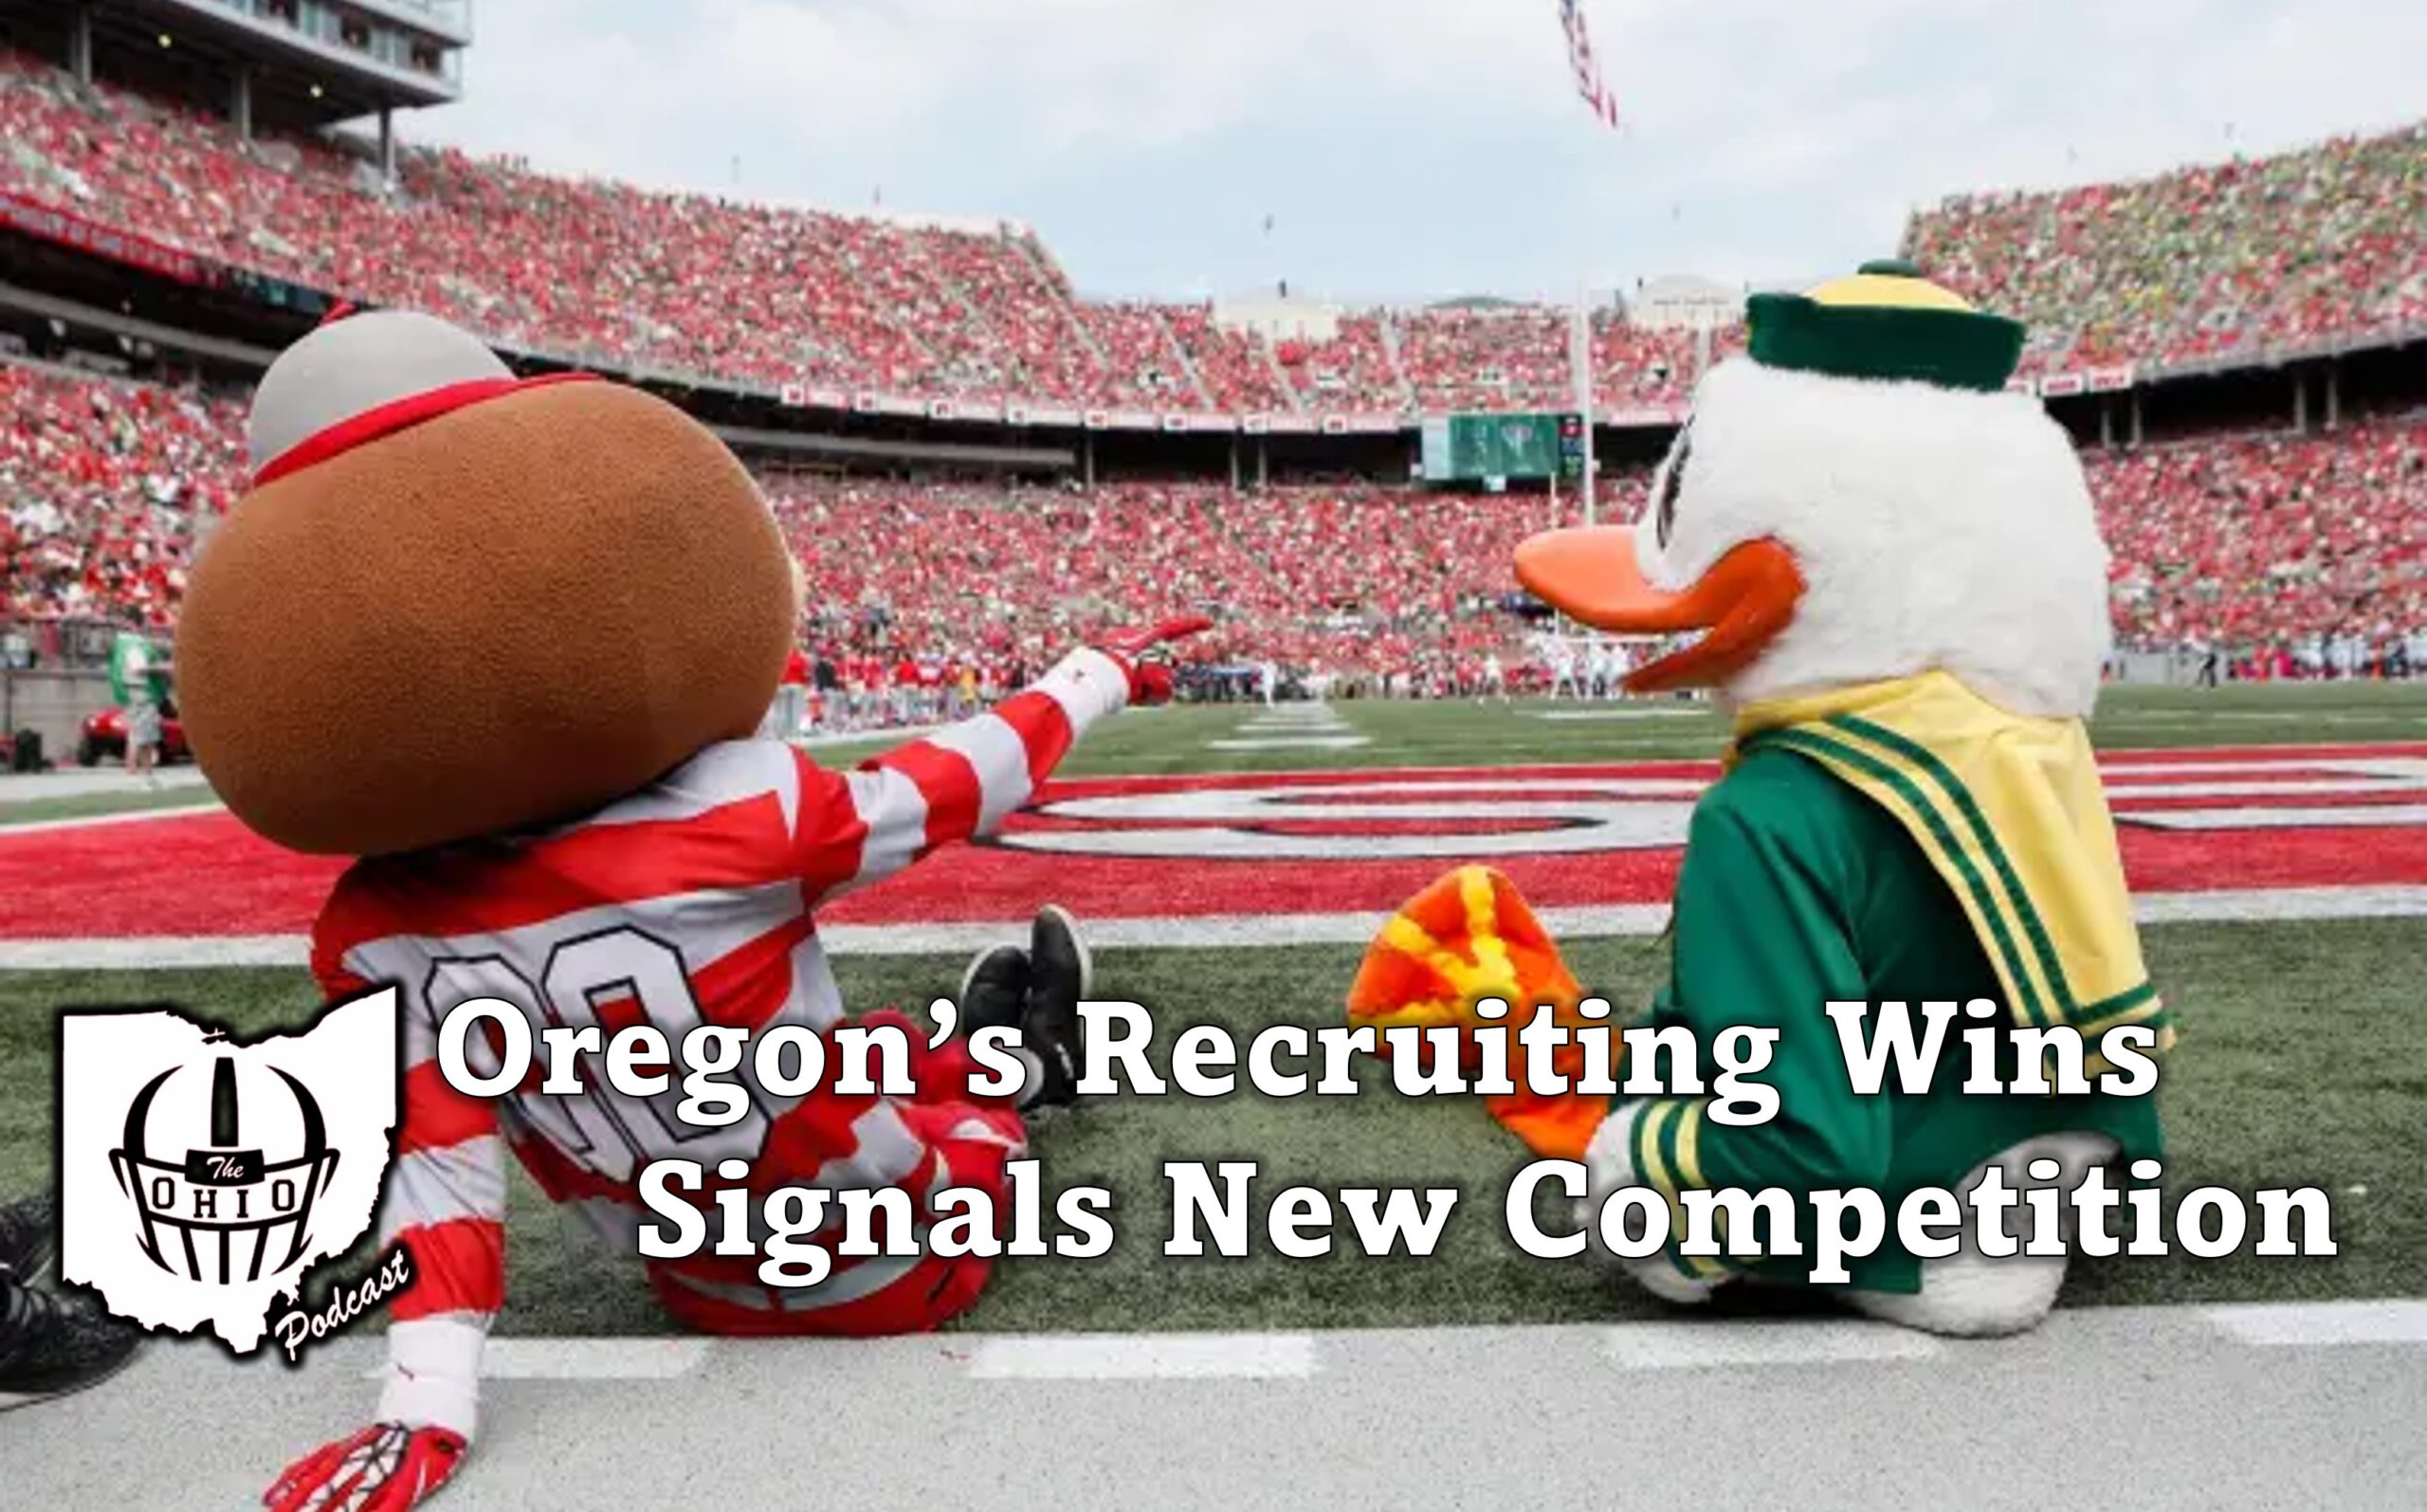 Oregon's Recruiting Wins Signals New Competition for Ohio State.